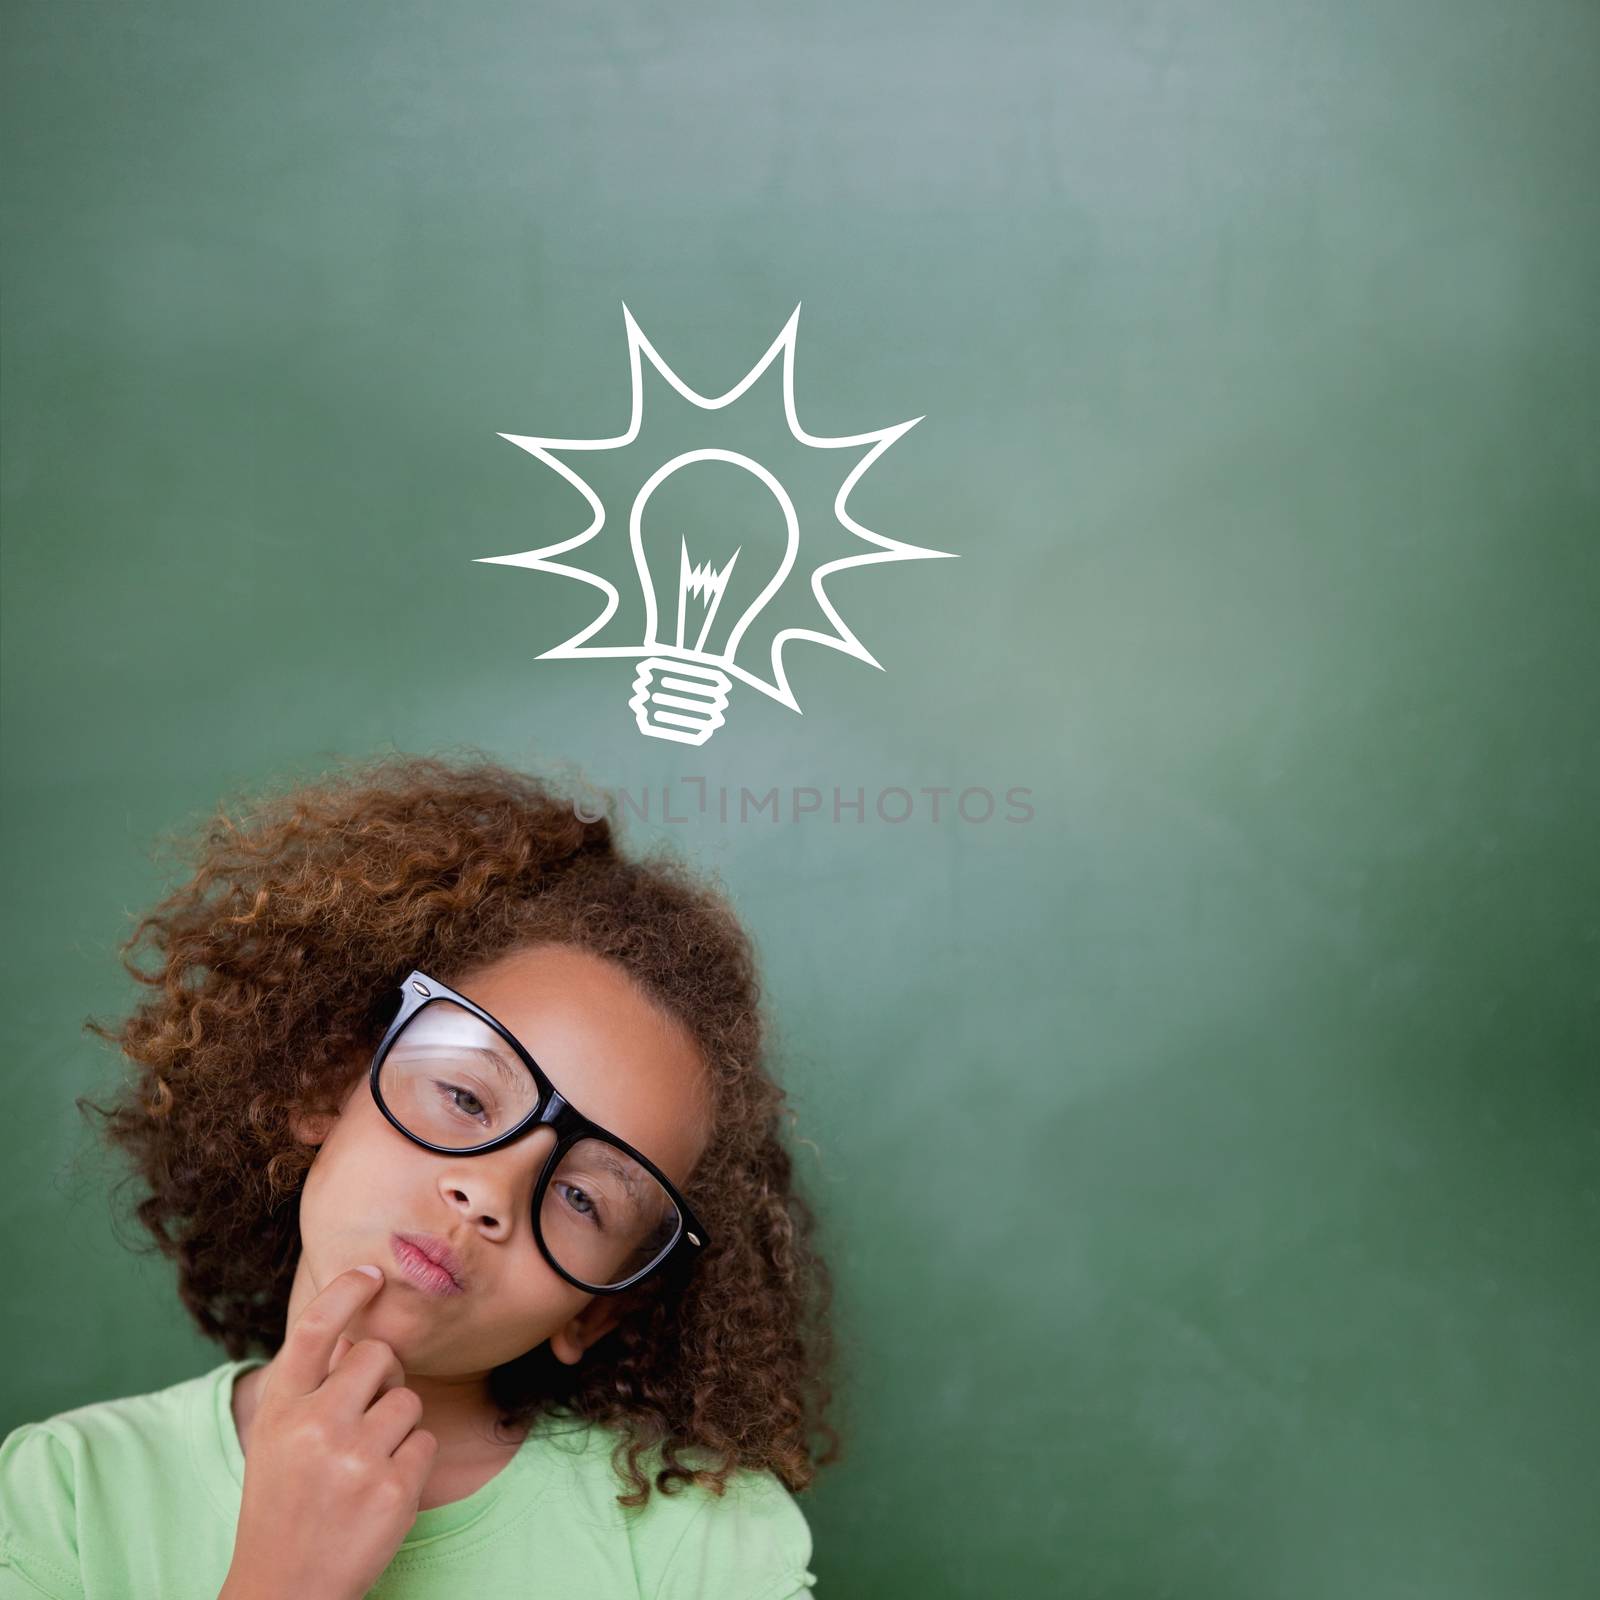 Cute pupil thinking against idea and innovation graphic